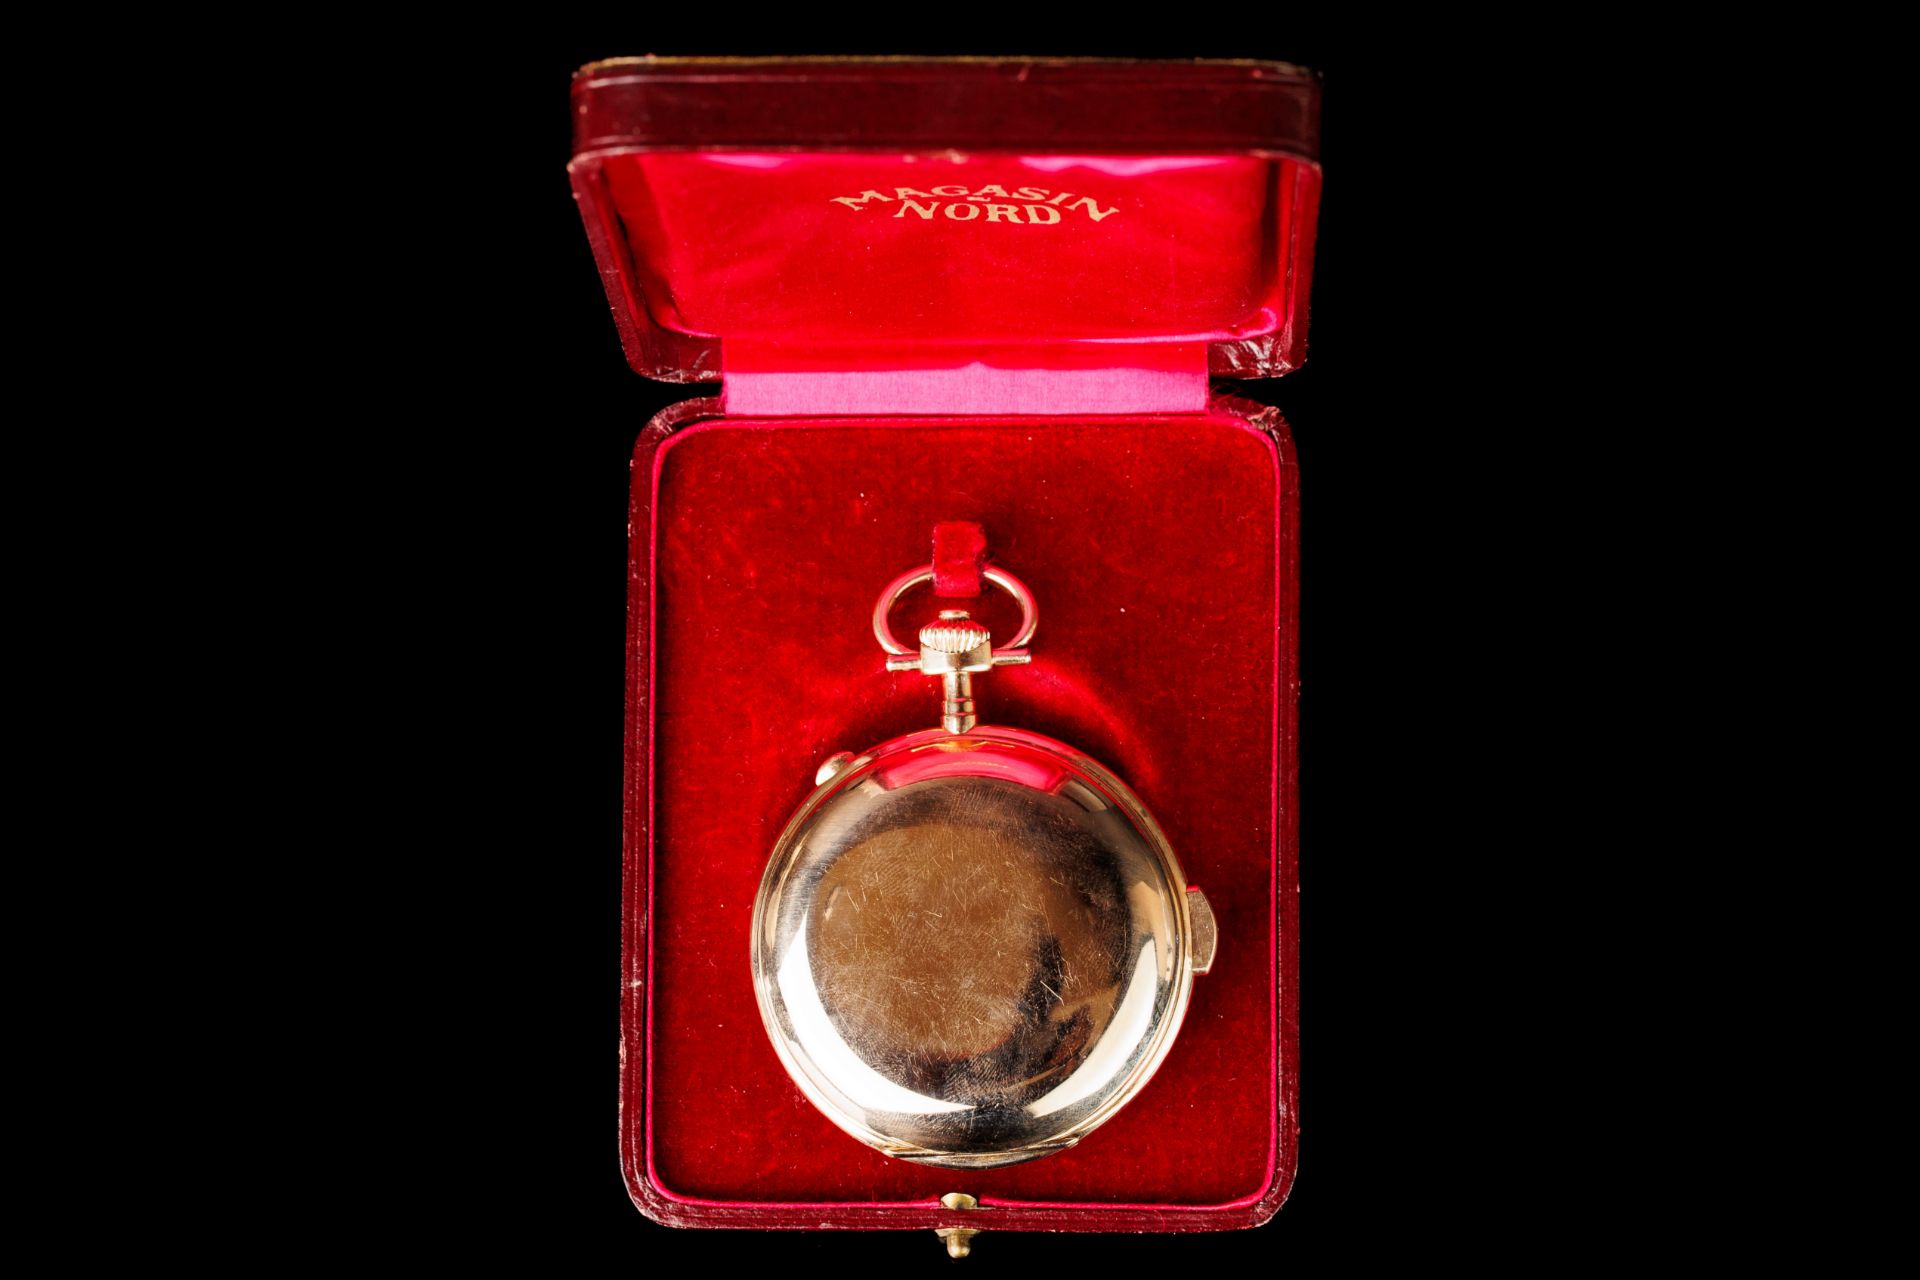 Antique Gold Pocket Watch with Chime in a Case. Geneva. Switzerland. - Image 2 of 9